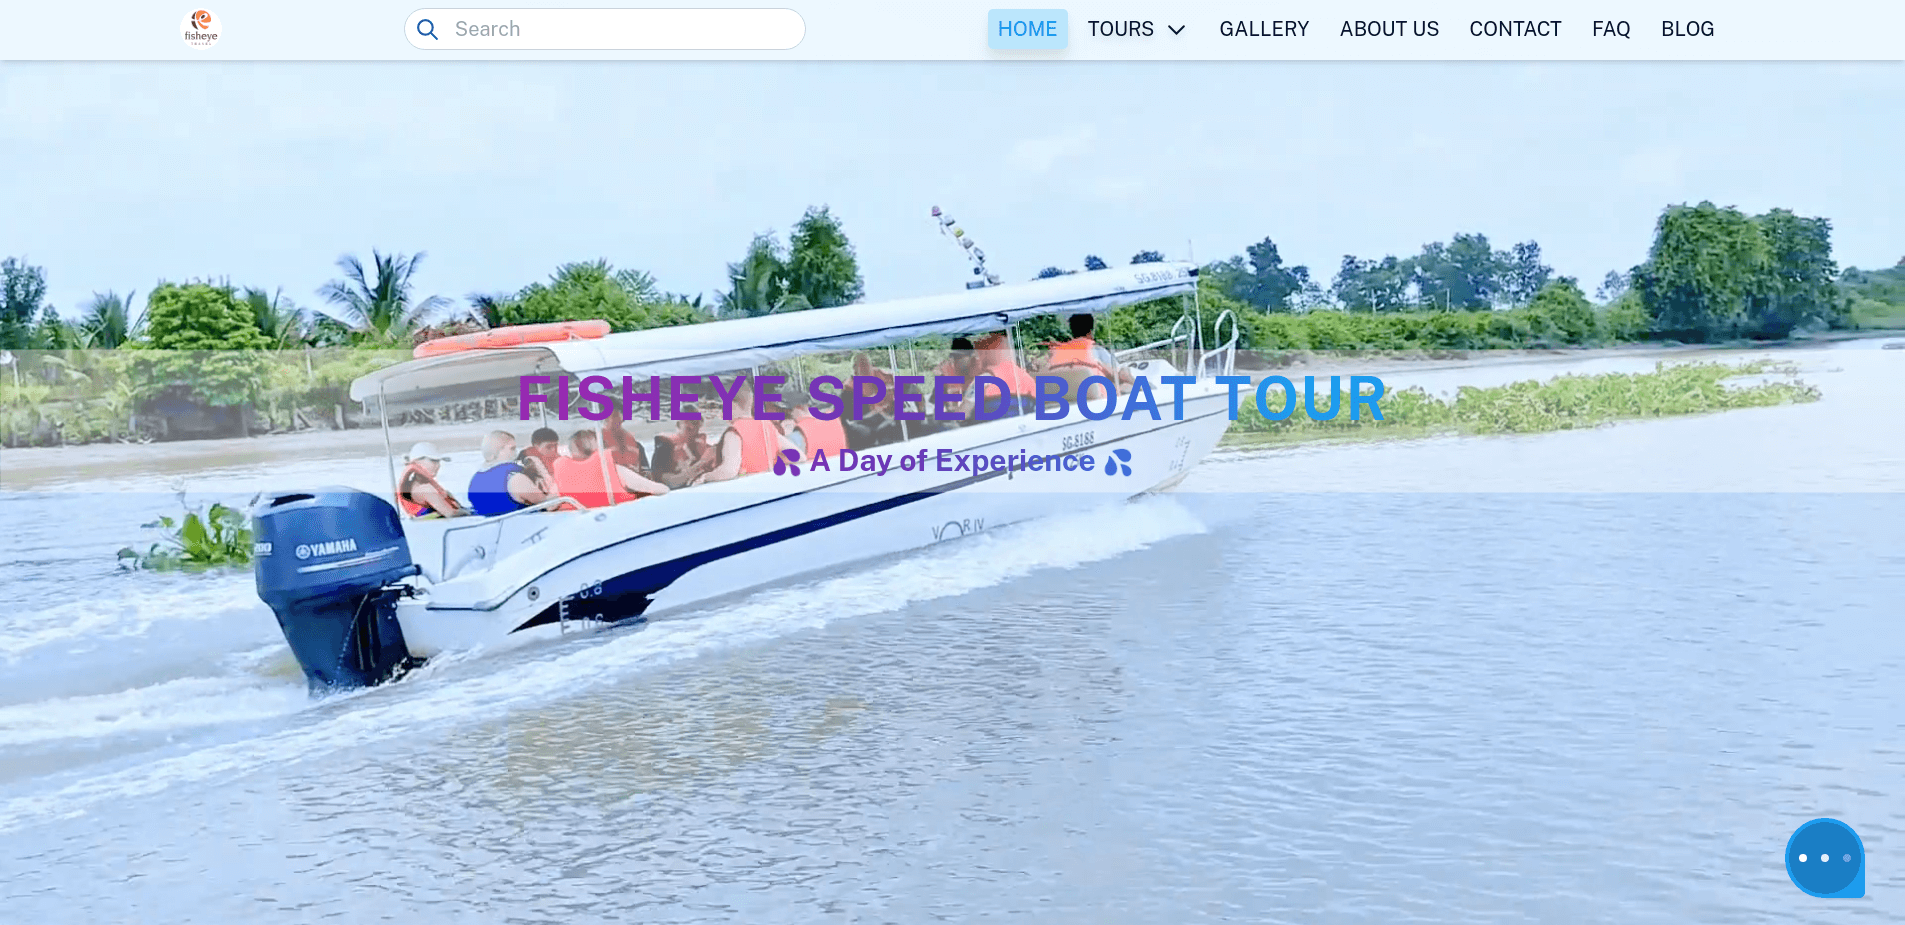 Cu Chi Tunnels Tour by Boat